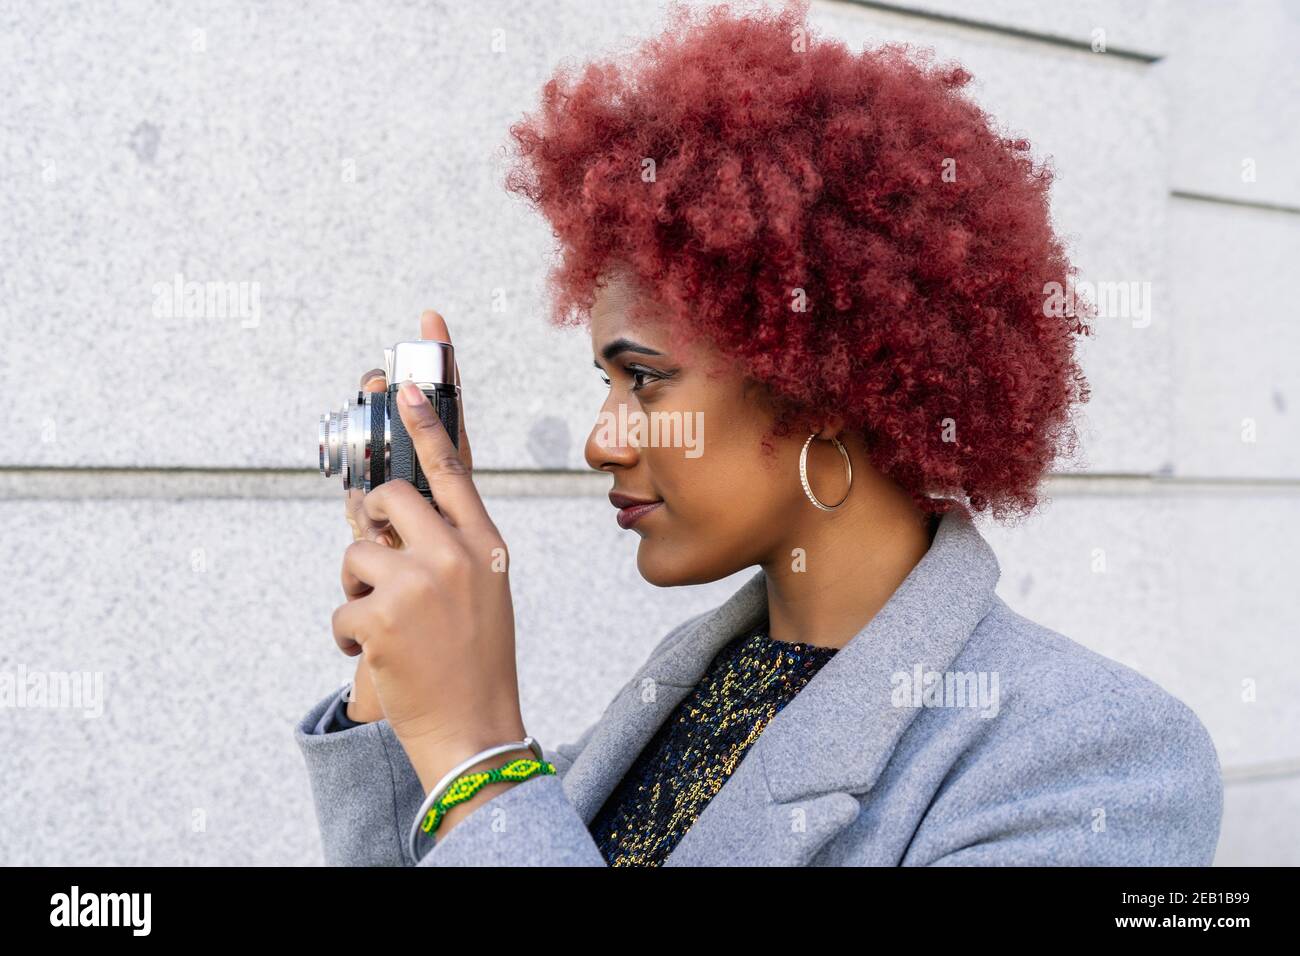 beautiful woman with afro hair taking pictures with her old camera Stock  Photo - Alamy